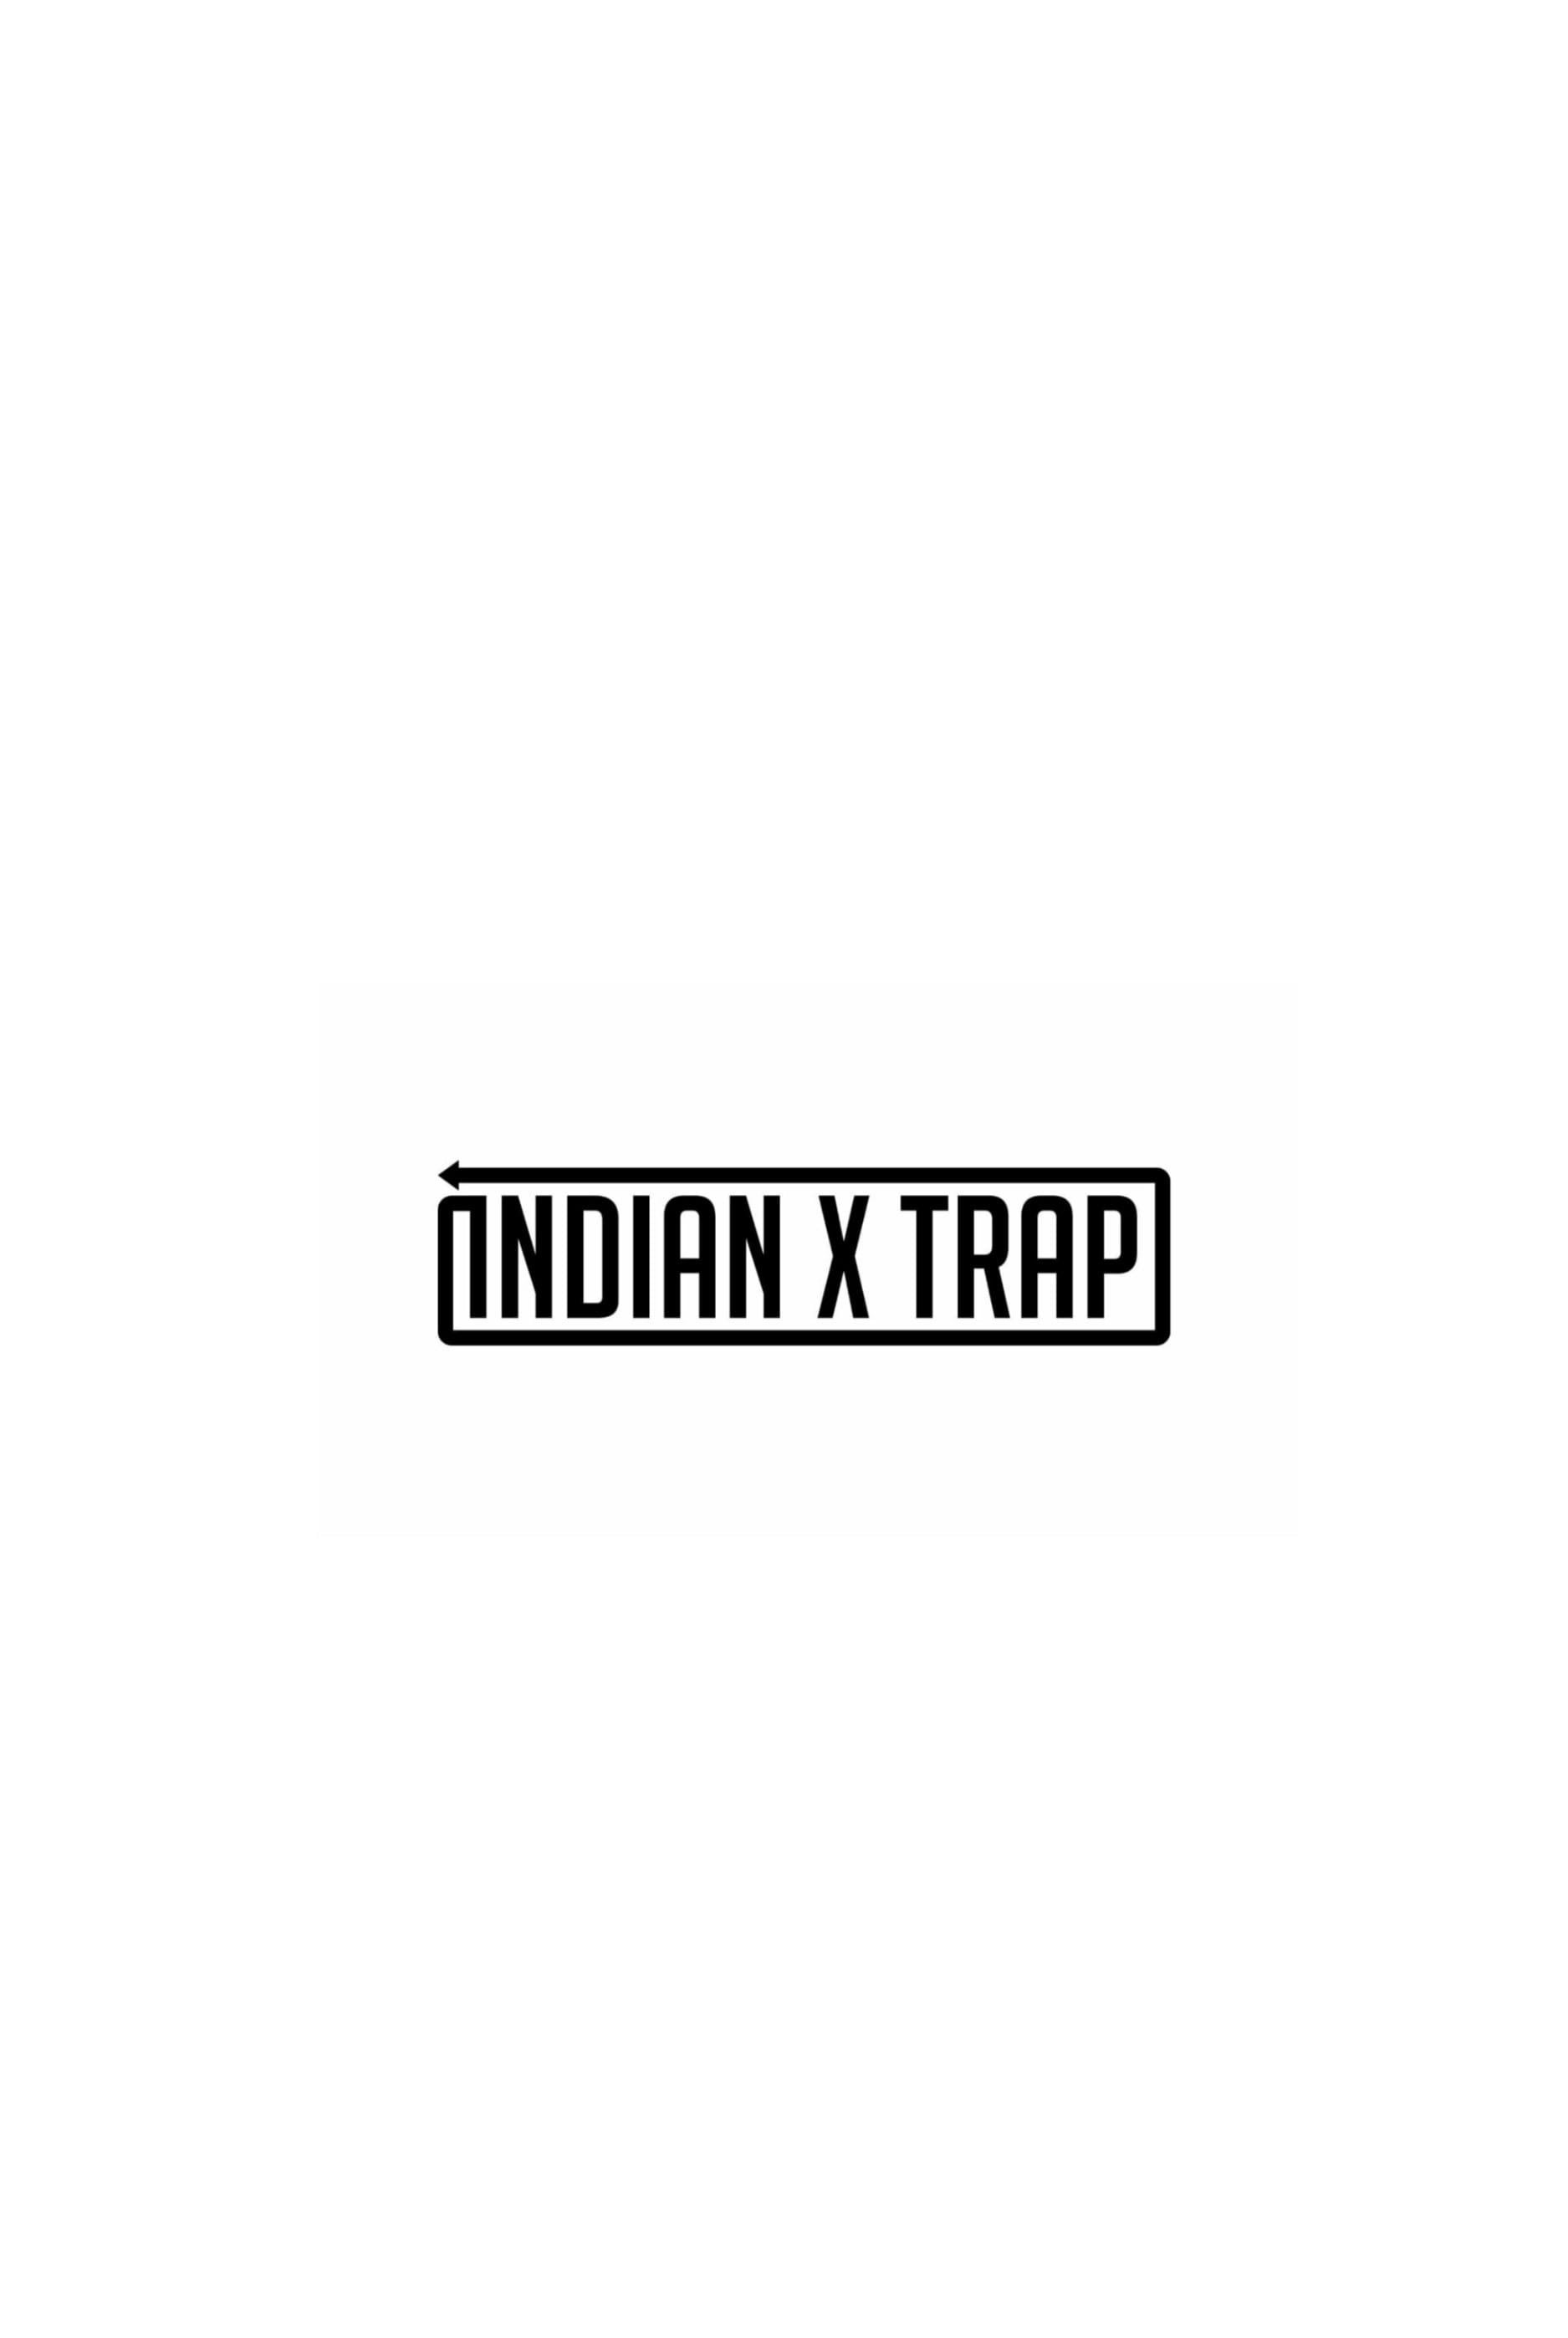 Indian X Trap